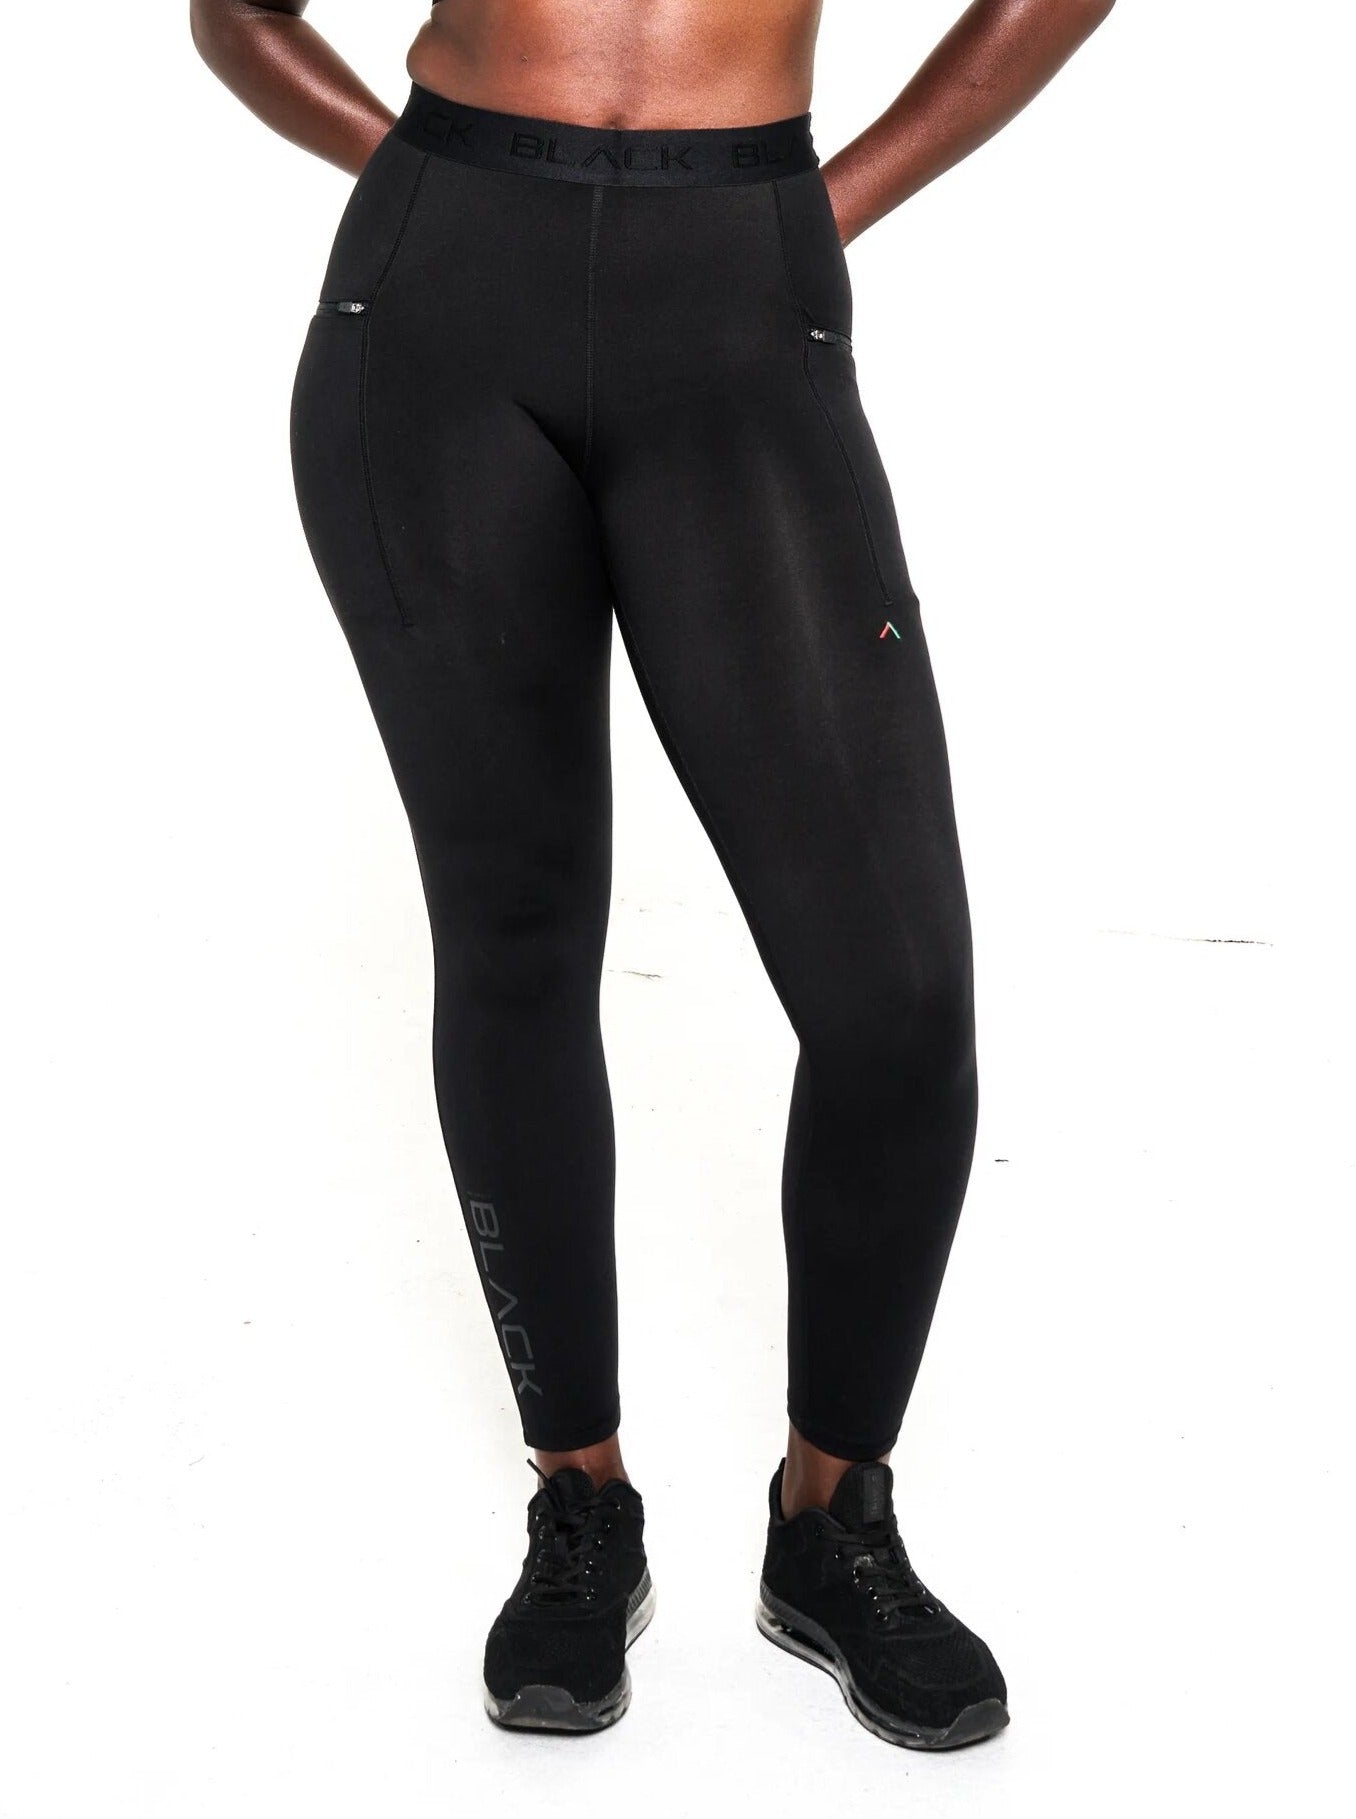 Women's Stealth Training Tights